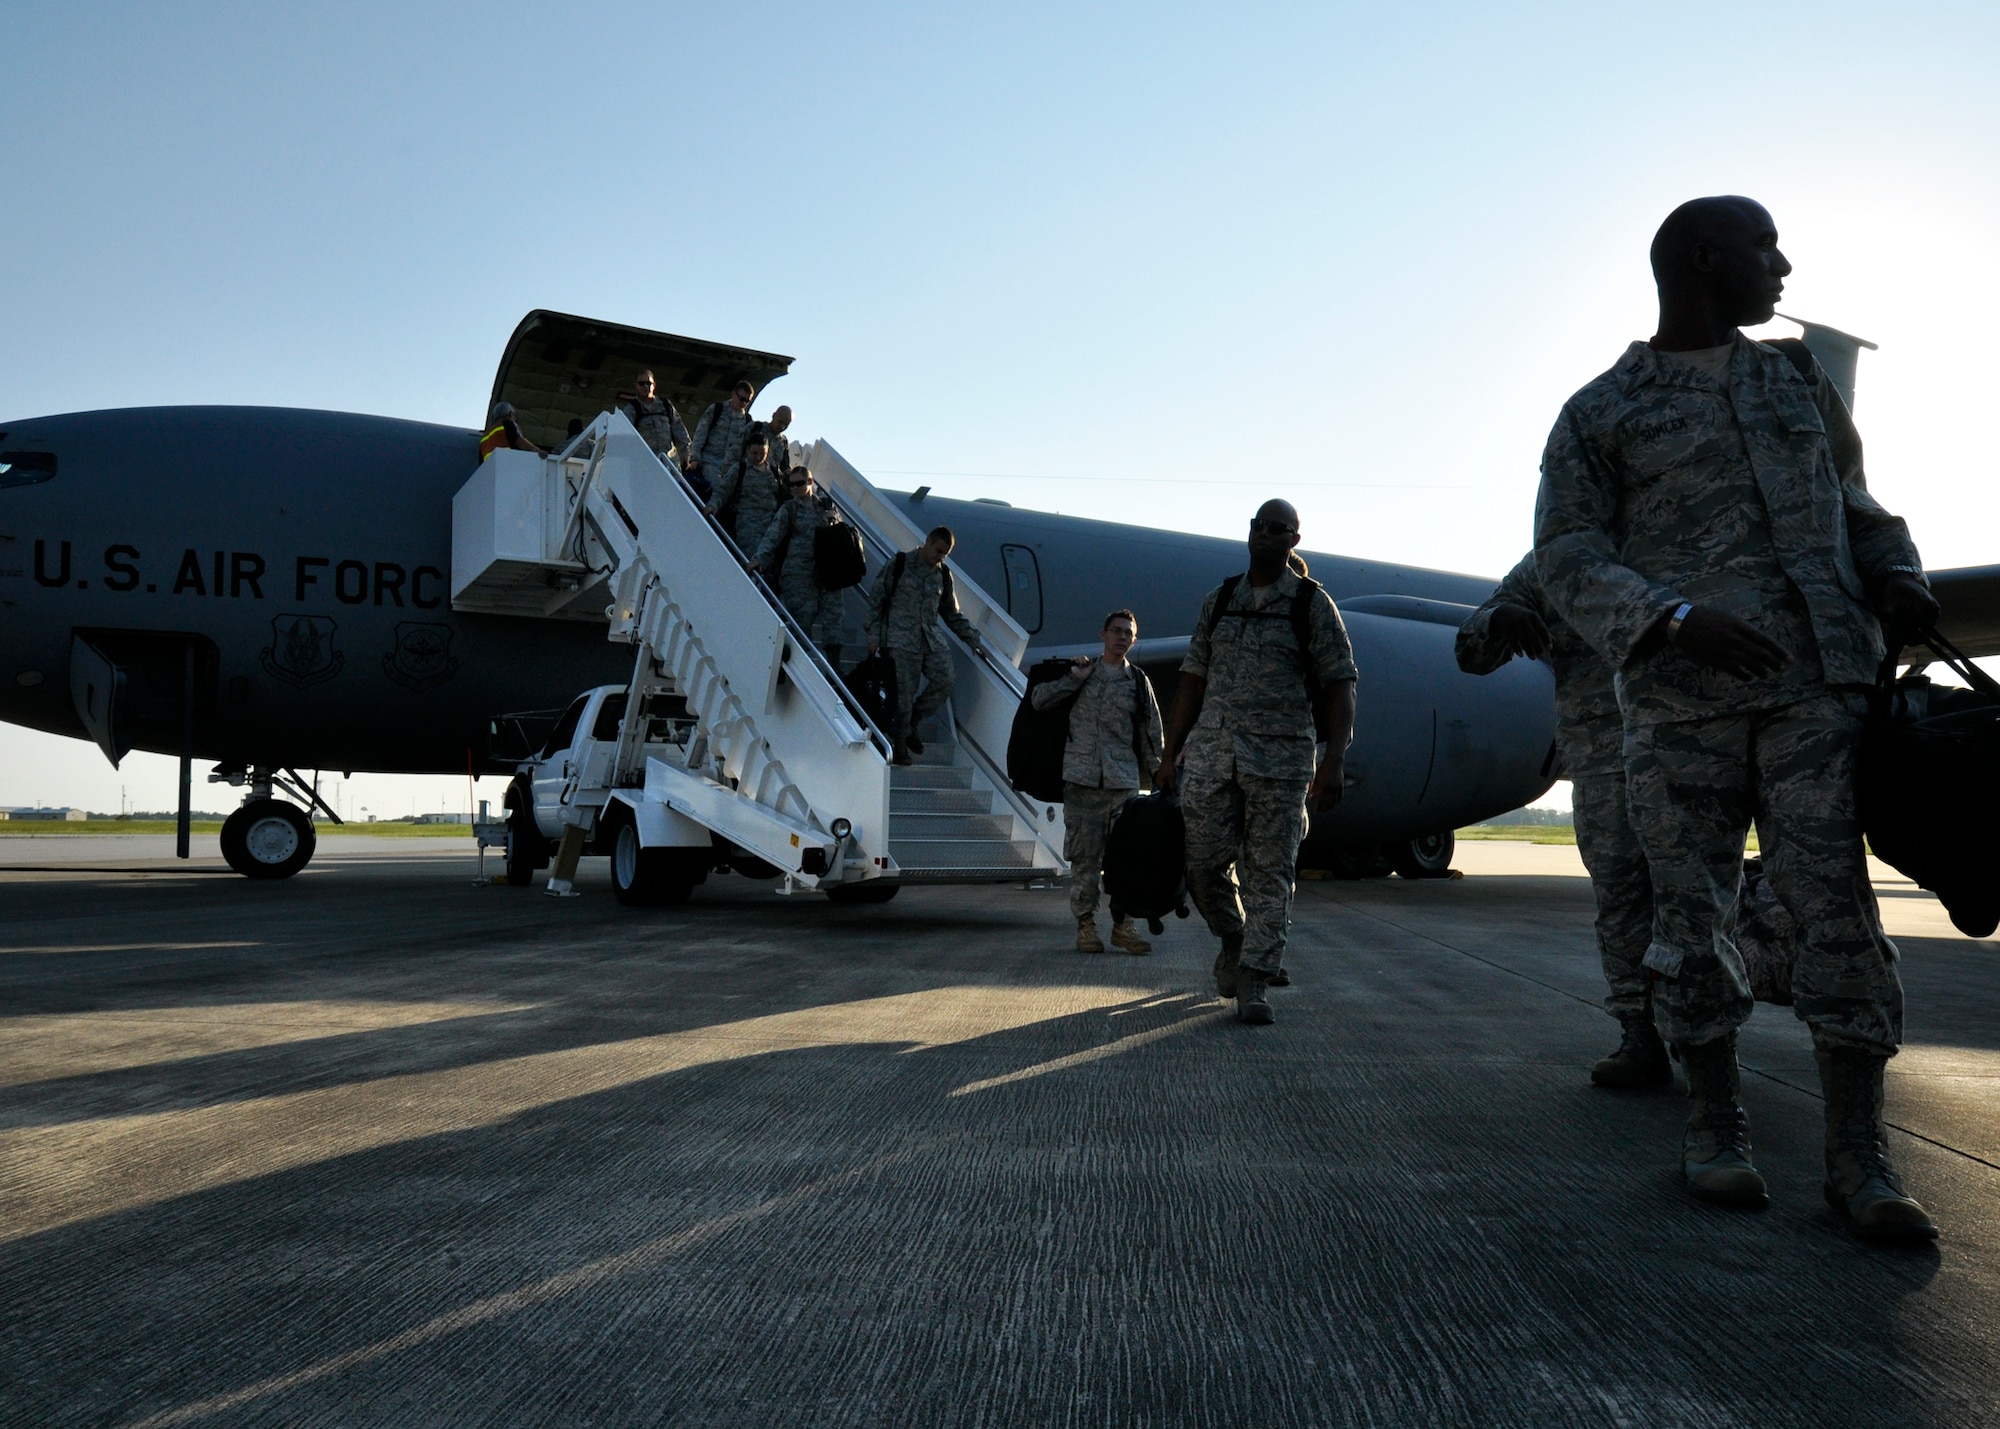 Maintainers and security forces Airmen from the 4th Fighter Wing disembark the KC-135 Stratotanker after arriving to Eglin Air Force Base Fla., Sept. 1 as part of a hurricane evacuation from Seymour Johnson AFB, N.C.  Approximately 30 F-15E Strike Eagles, three KC-135s, and 300 personnel arrived to beddown the aircraft as Hurricane Earl headed for the N.C. coast.  The 33rd Fighter Wing, a former F-15 unit now the training wing for the F-35 Lightning II, provided flightline space for the aircraft.  (U.S. Air Force photo/Samuel King Jr.)